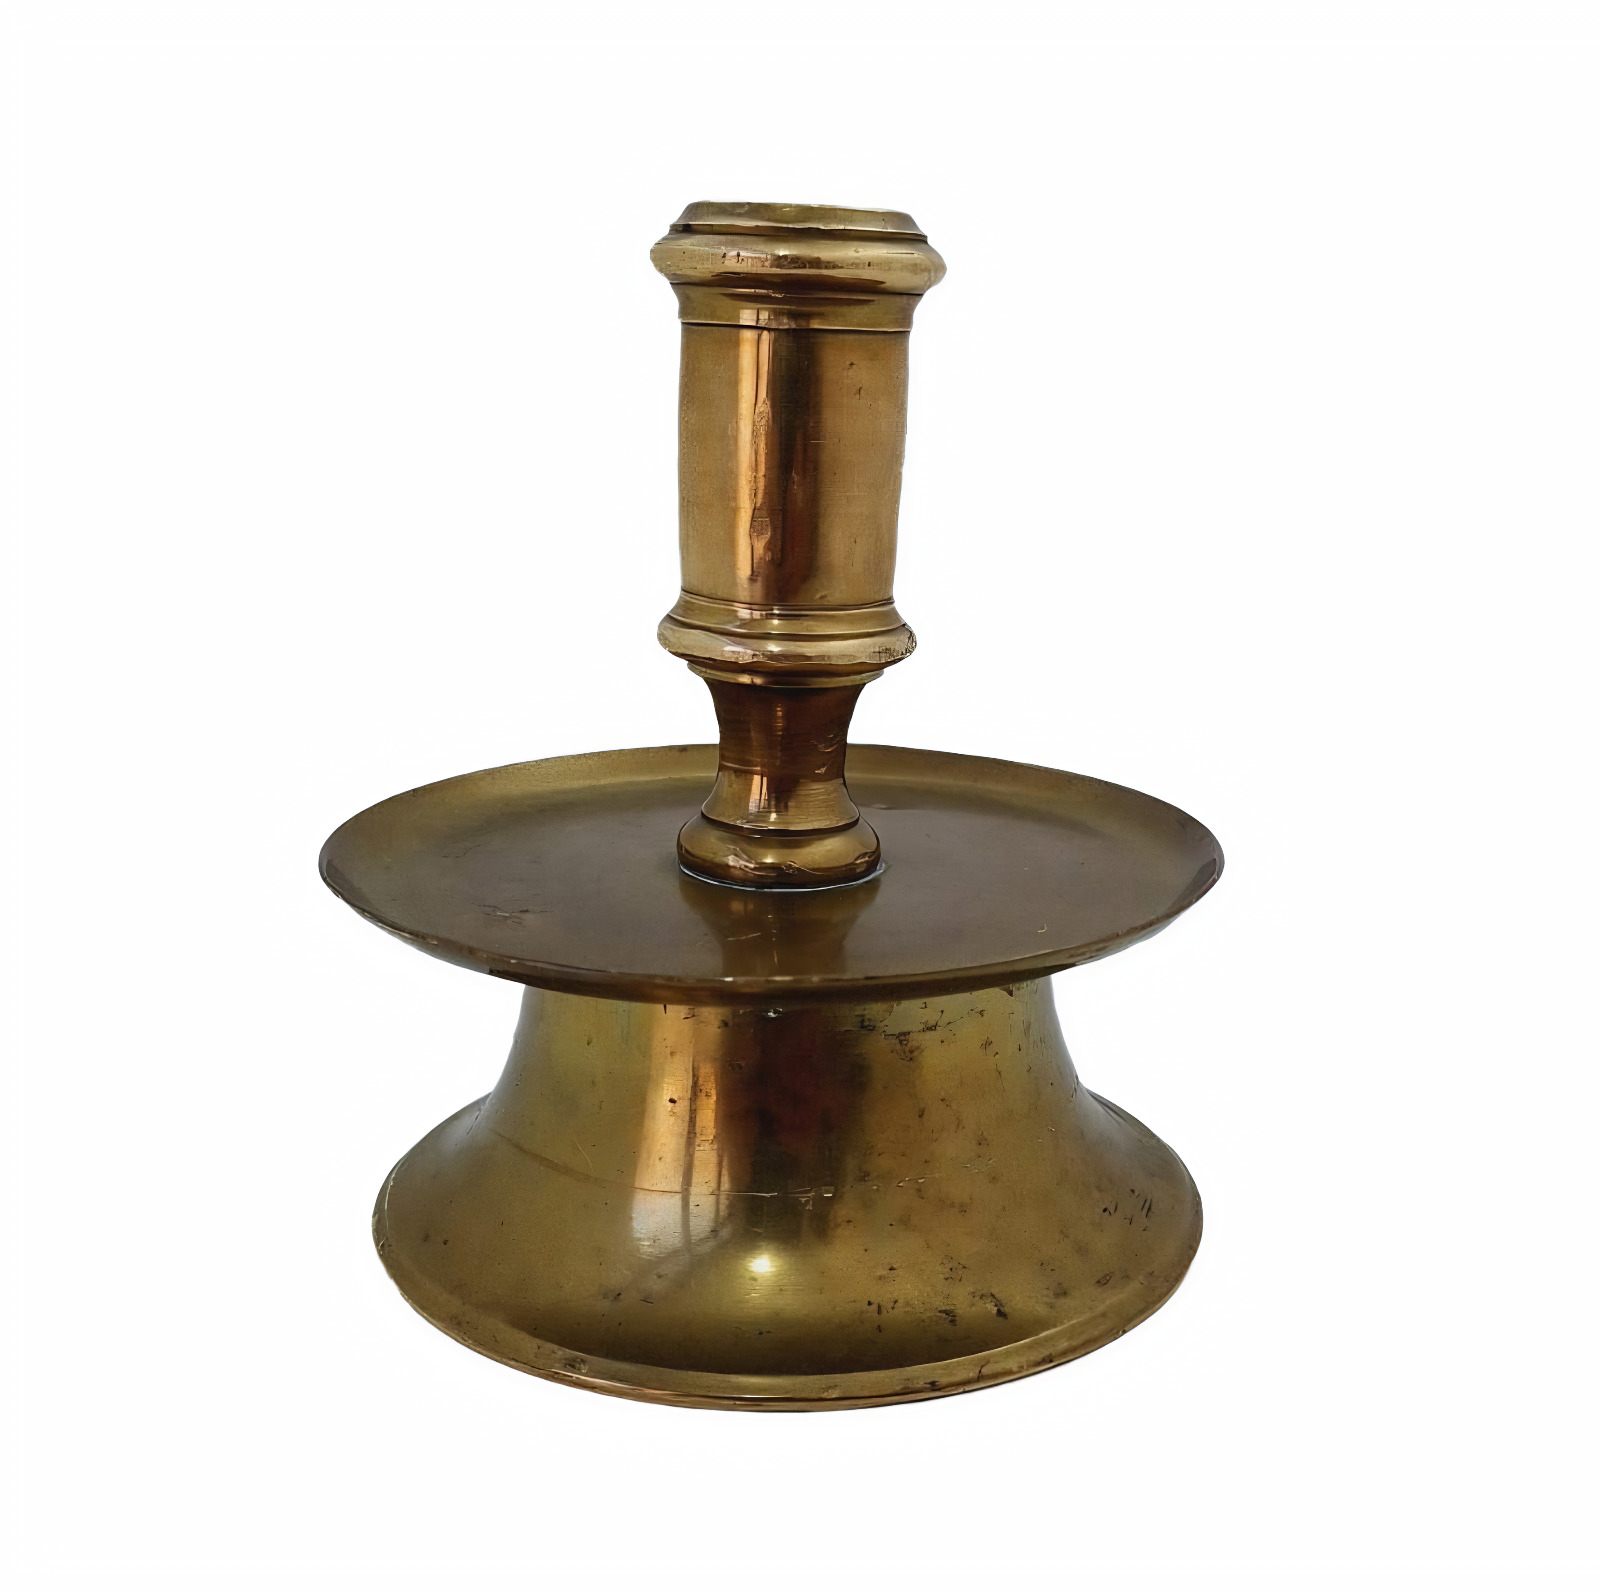 ANTIQUE 17TH CENTURY SPANISH BRASS CAPSTAN CANDLE HOLDER CANDLESTICK